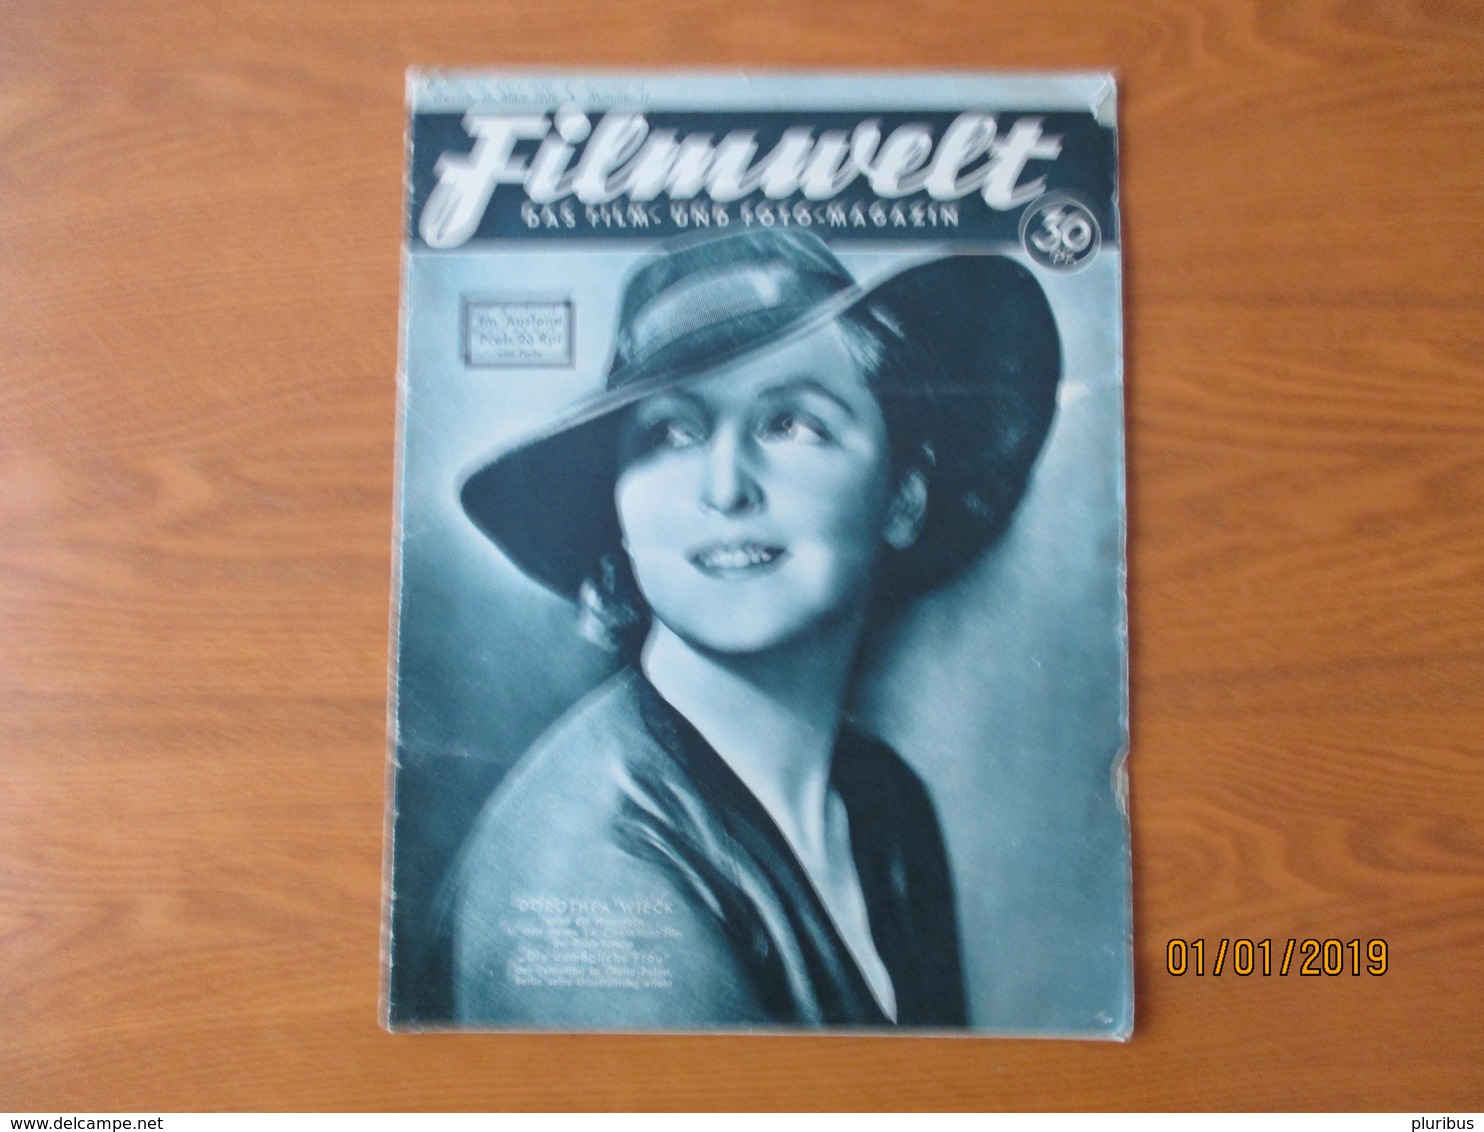 FILMWELT 1936 11 , D. WIECK , B. GIGLI , B. HORNEY , R. TAYLOR , E. POWELL And Others, O - Films & TV